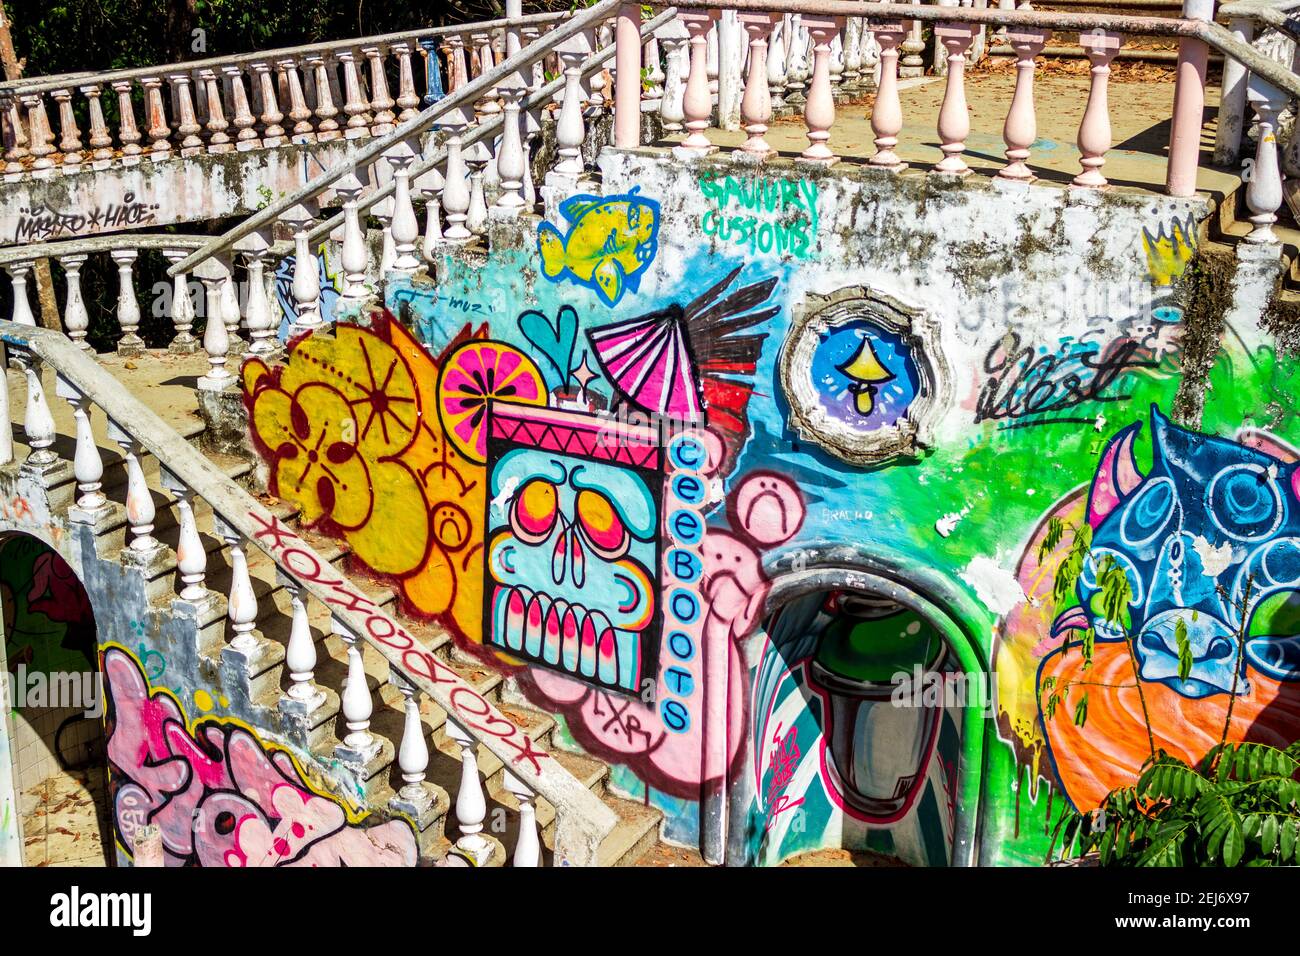 The ruins of a rumored resort, hotel or house provide a canvas for artistic graffiti handiwork in the jungle near Jaco, Costa Rica. Stock Photo